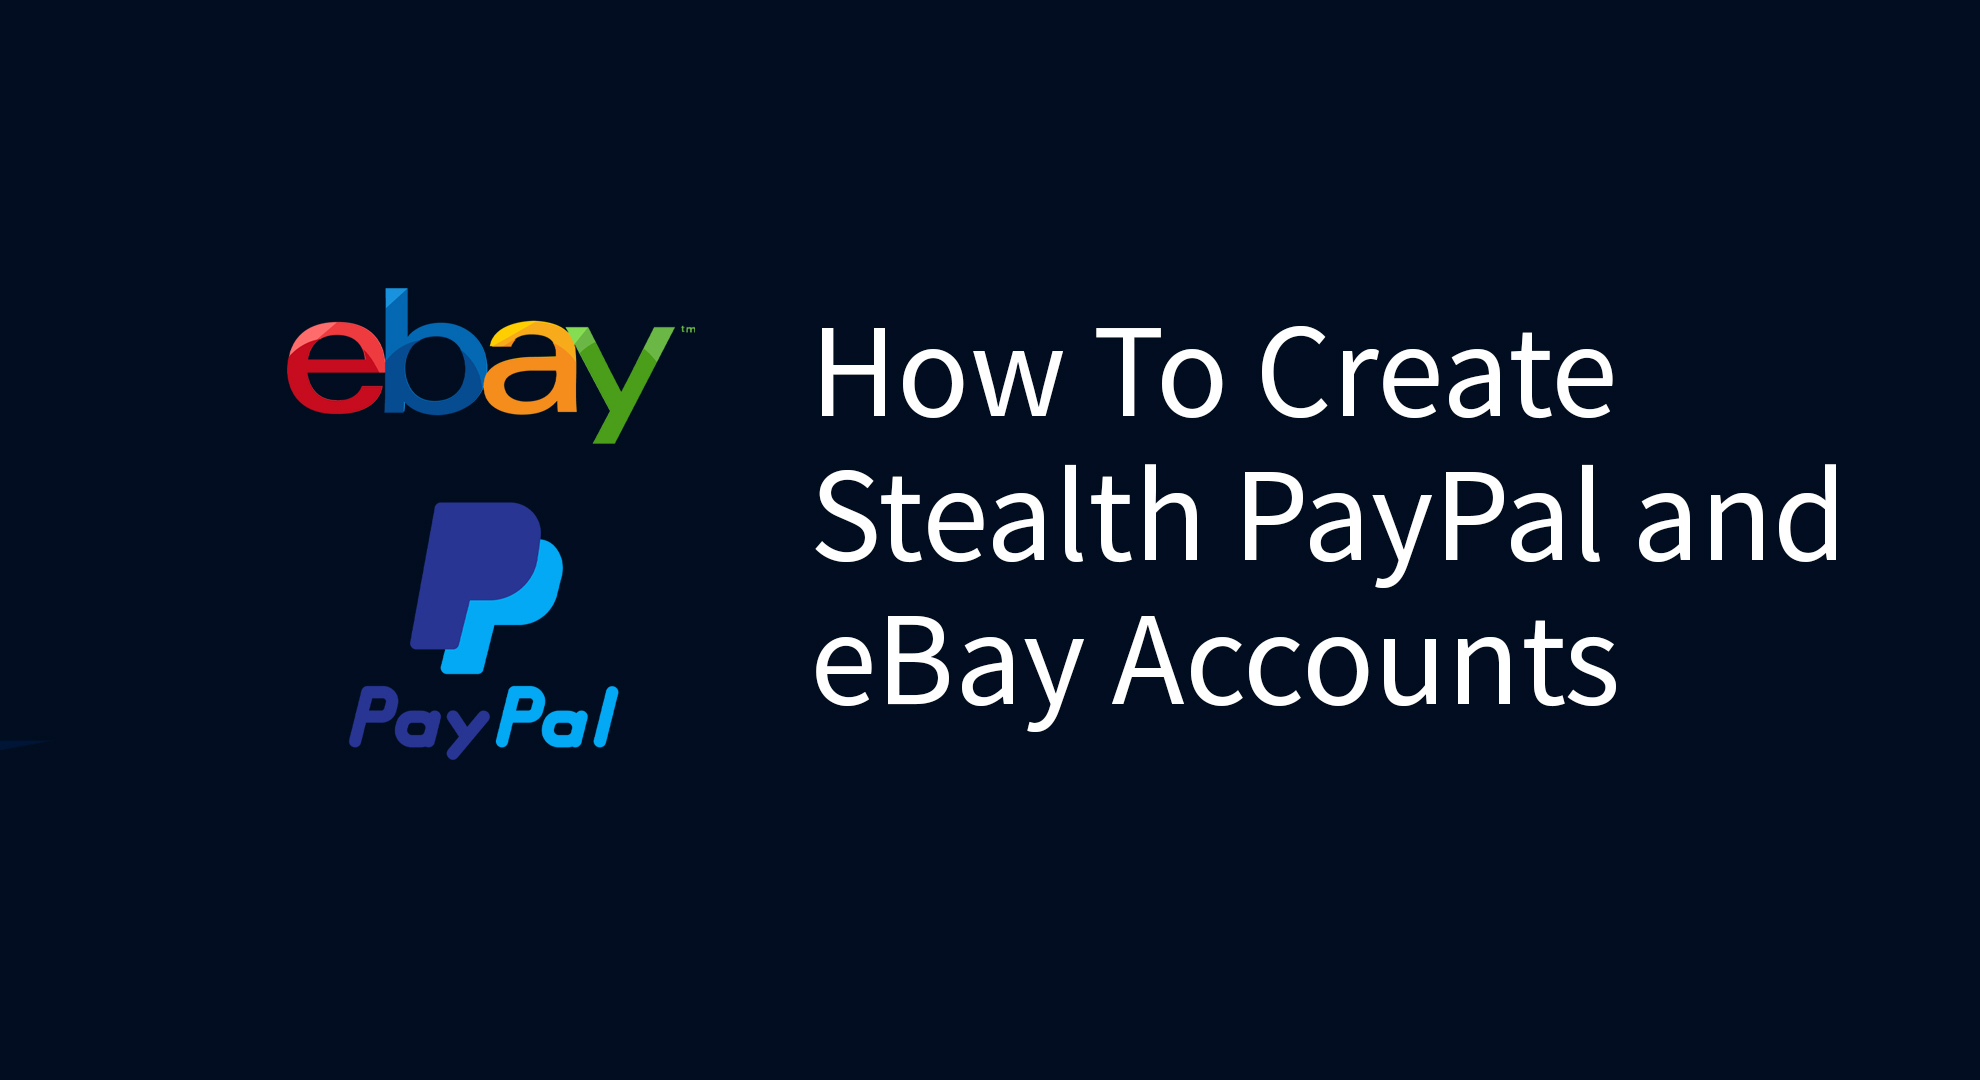 ebay stealth guide free